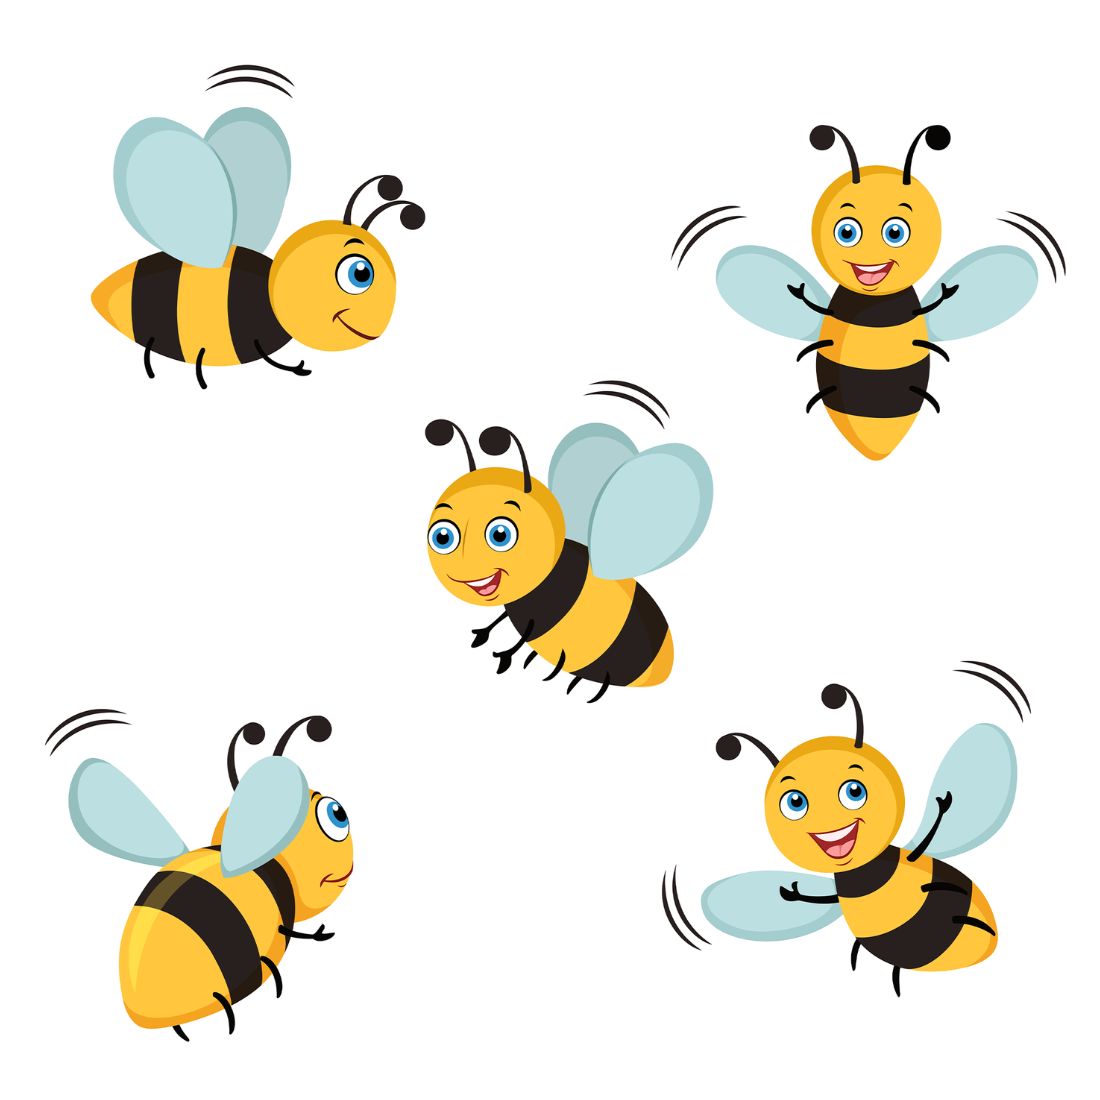 Honey Bee Bumble Bee Cut Outs Theme Birthday Decoration(12 Pcs)